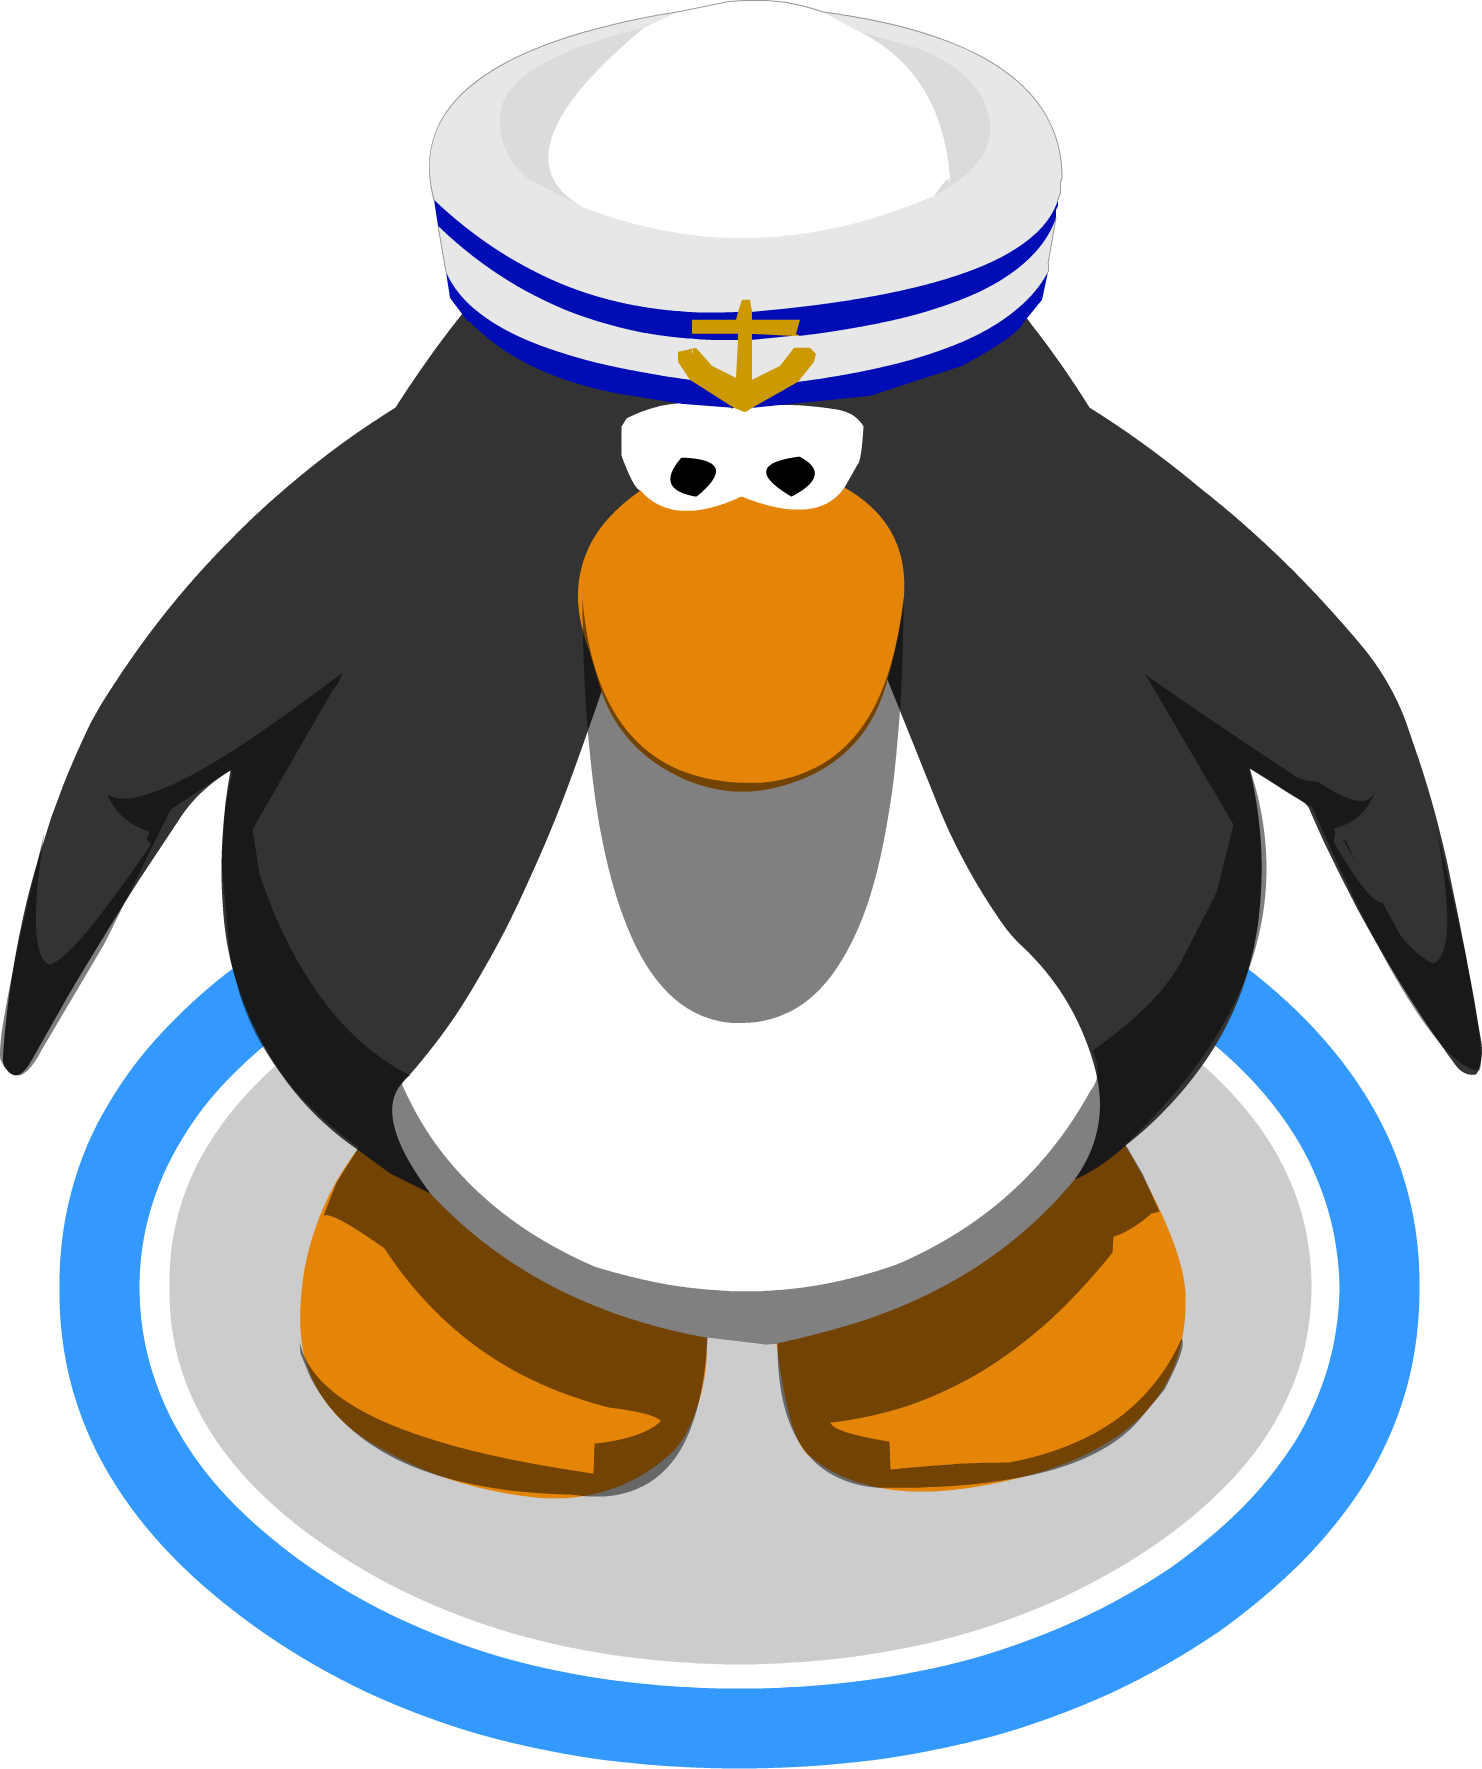 Image - Crew Cap ingame.PNG | Club Penguin Wiki | FANDOM powered by Wikia